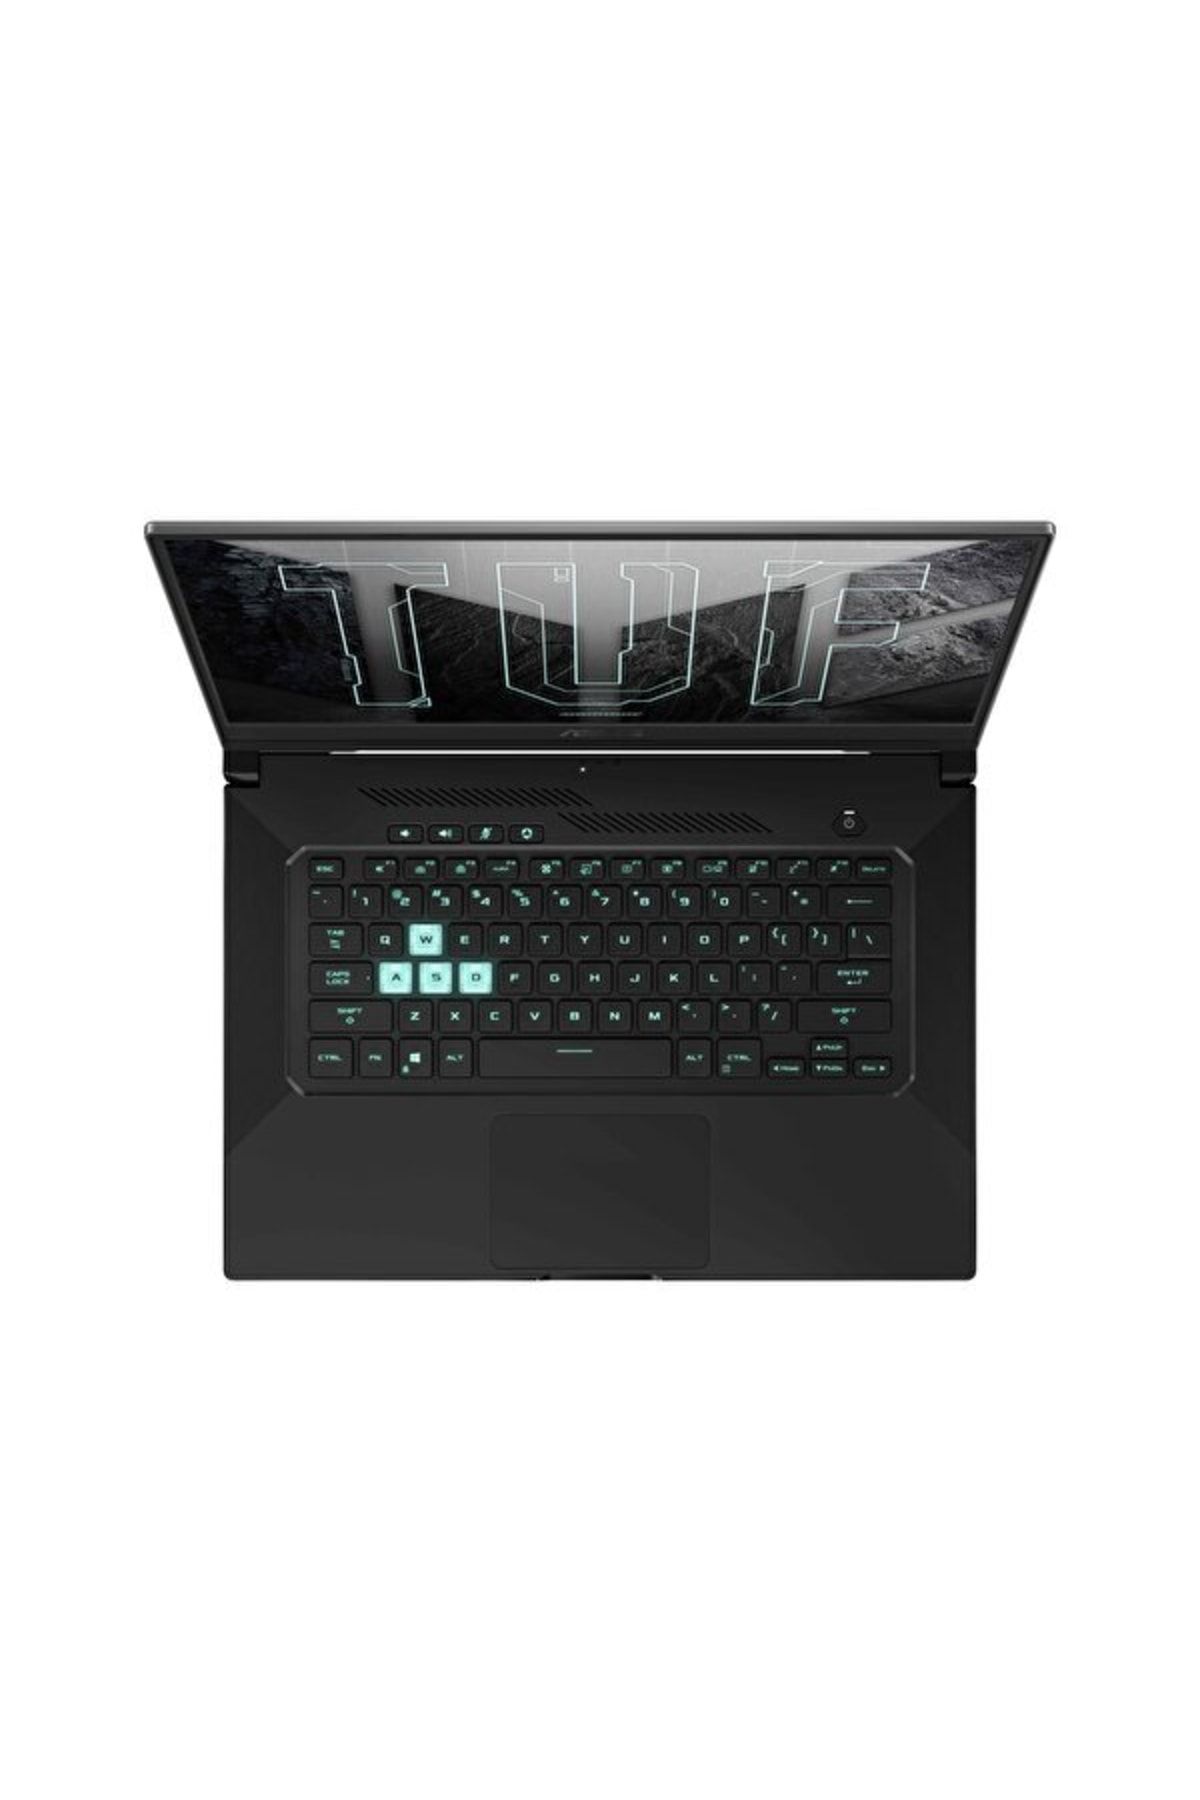 ASUS Fx516pc-hn023w Intel I5 11300h 16 Gb Ram 512 Gb Ssd Rtx3050 4gb 15.6" Fhd 144hz W11 Gaming Note